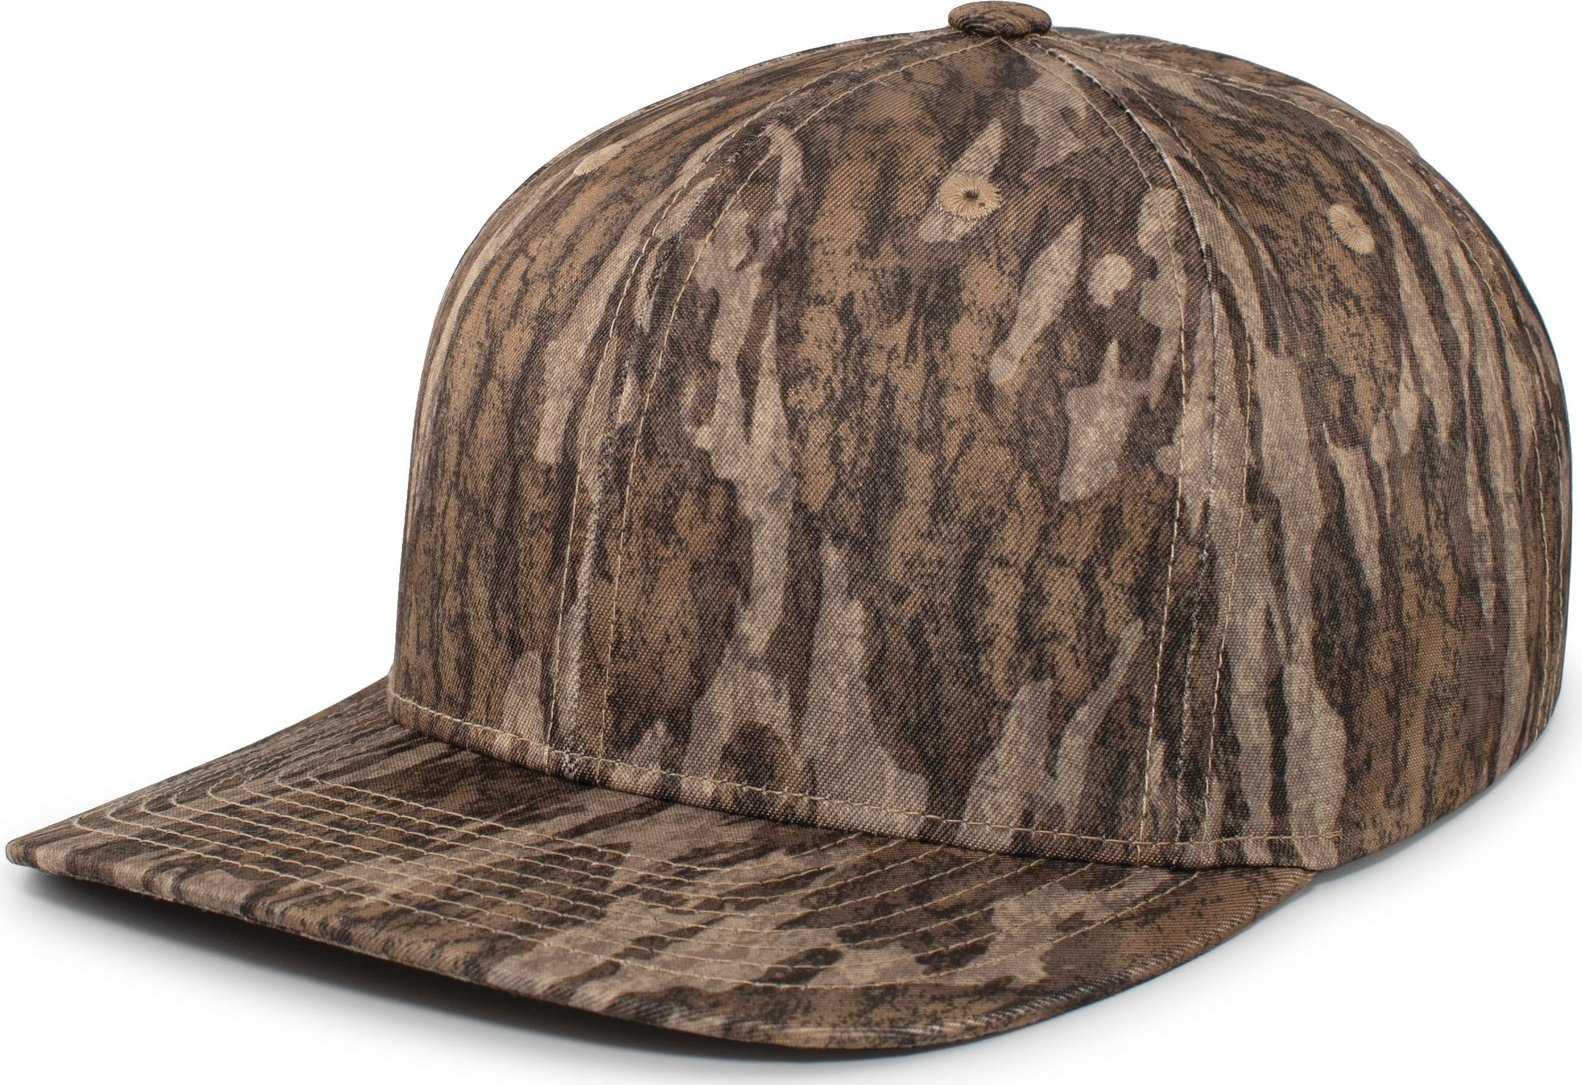 Pacific P680 MOSSY OAK GUIDE CAP - Mo New Bottomland